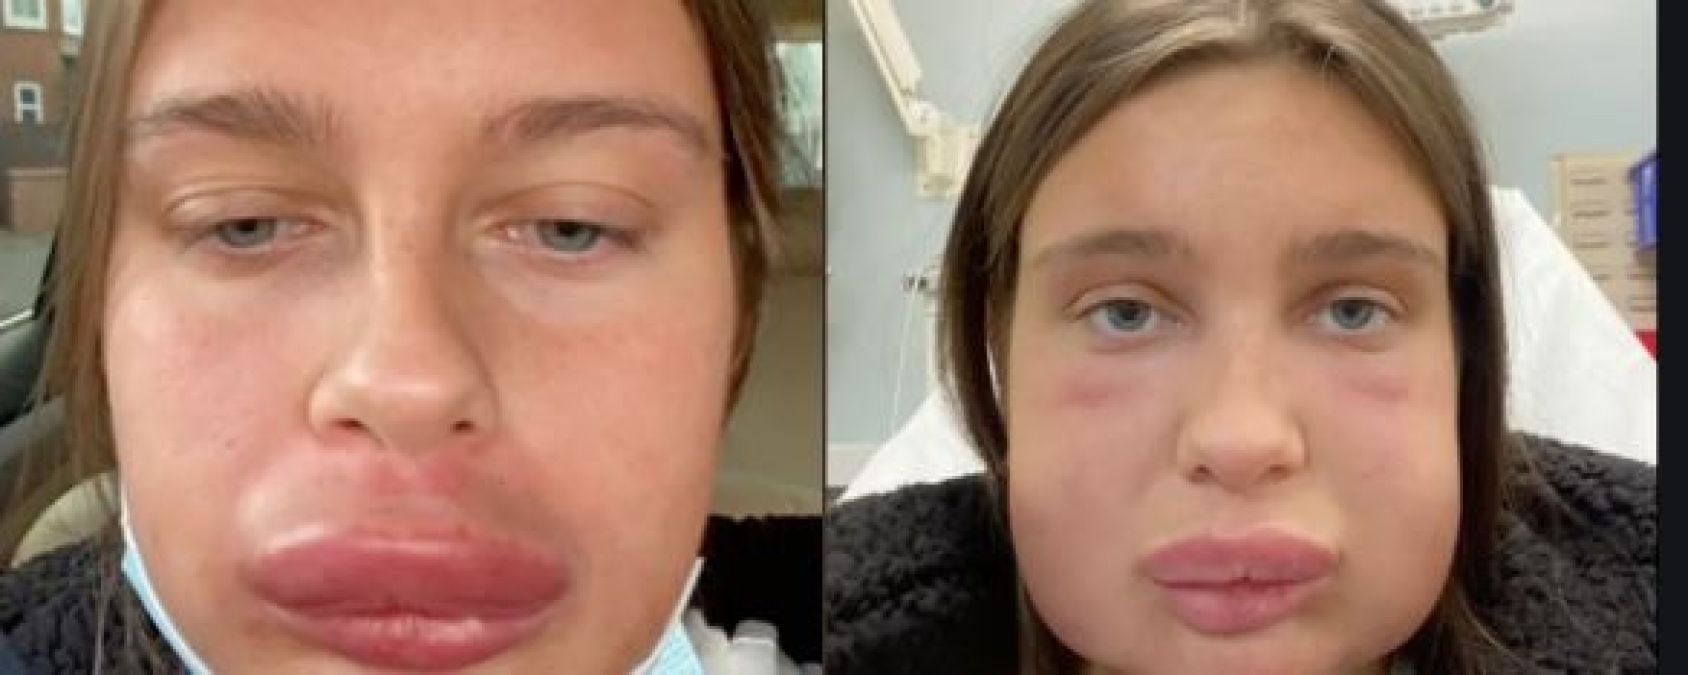 Surgery impaired woman's lips like balloons